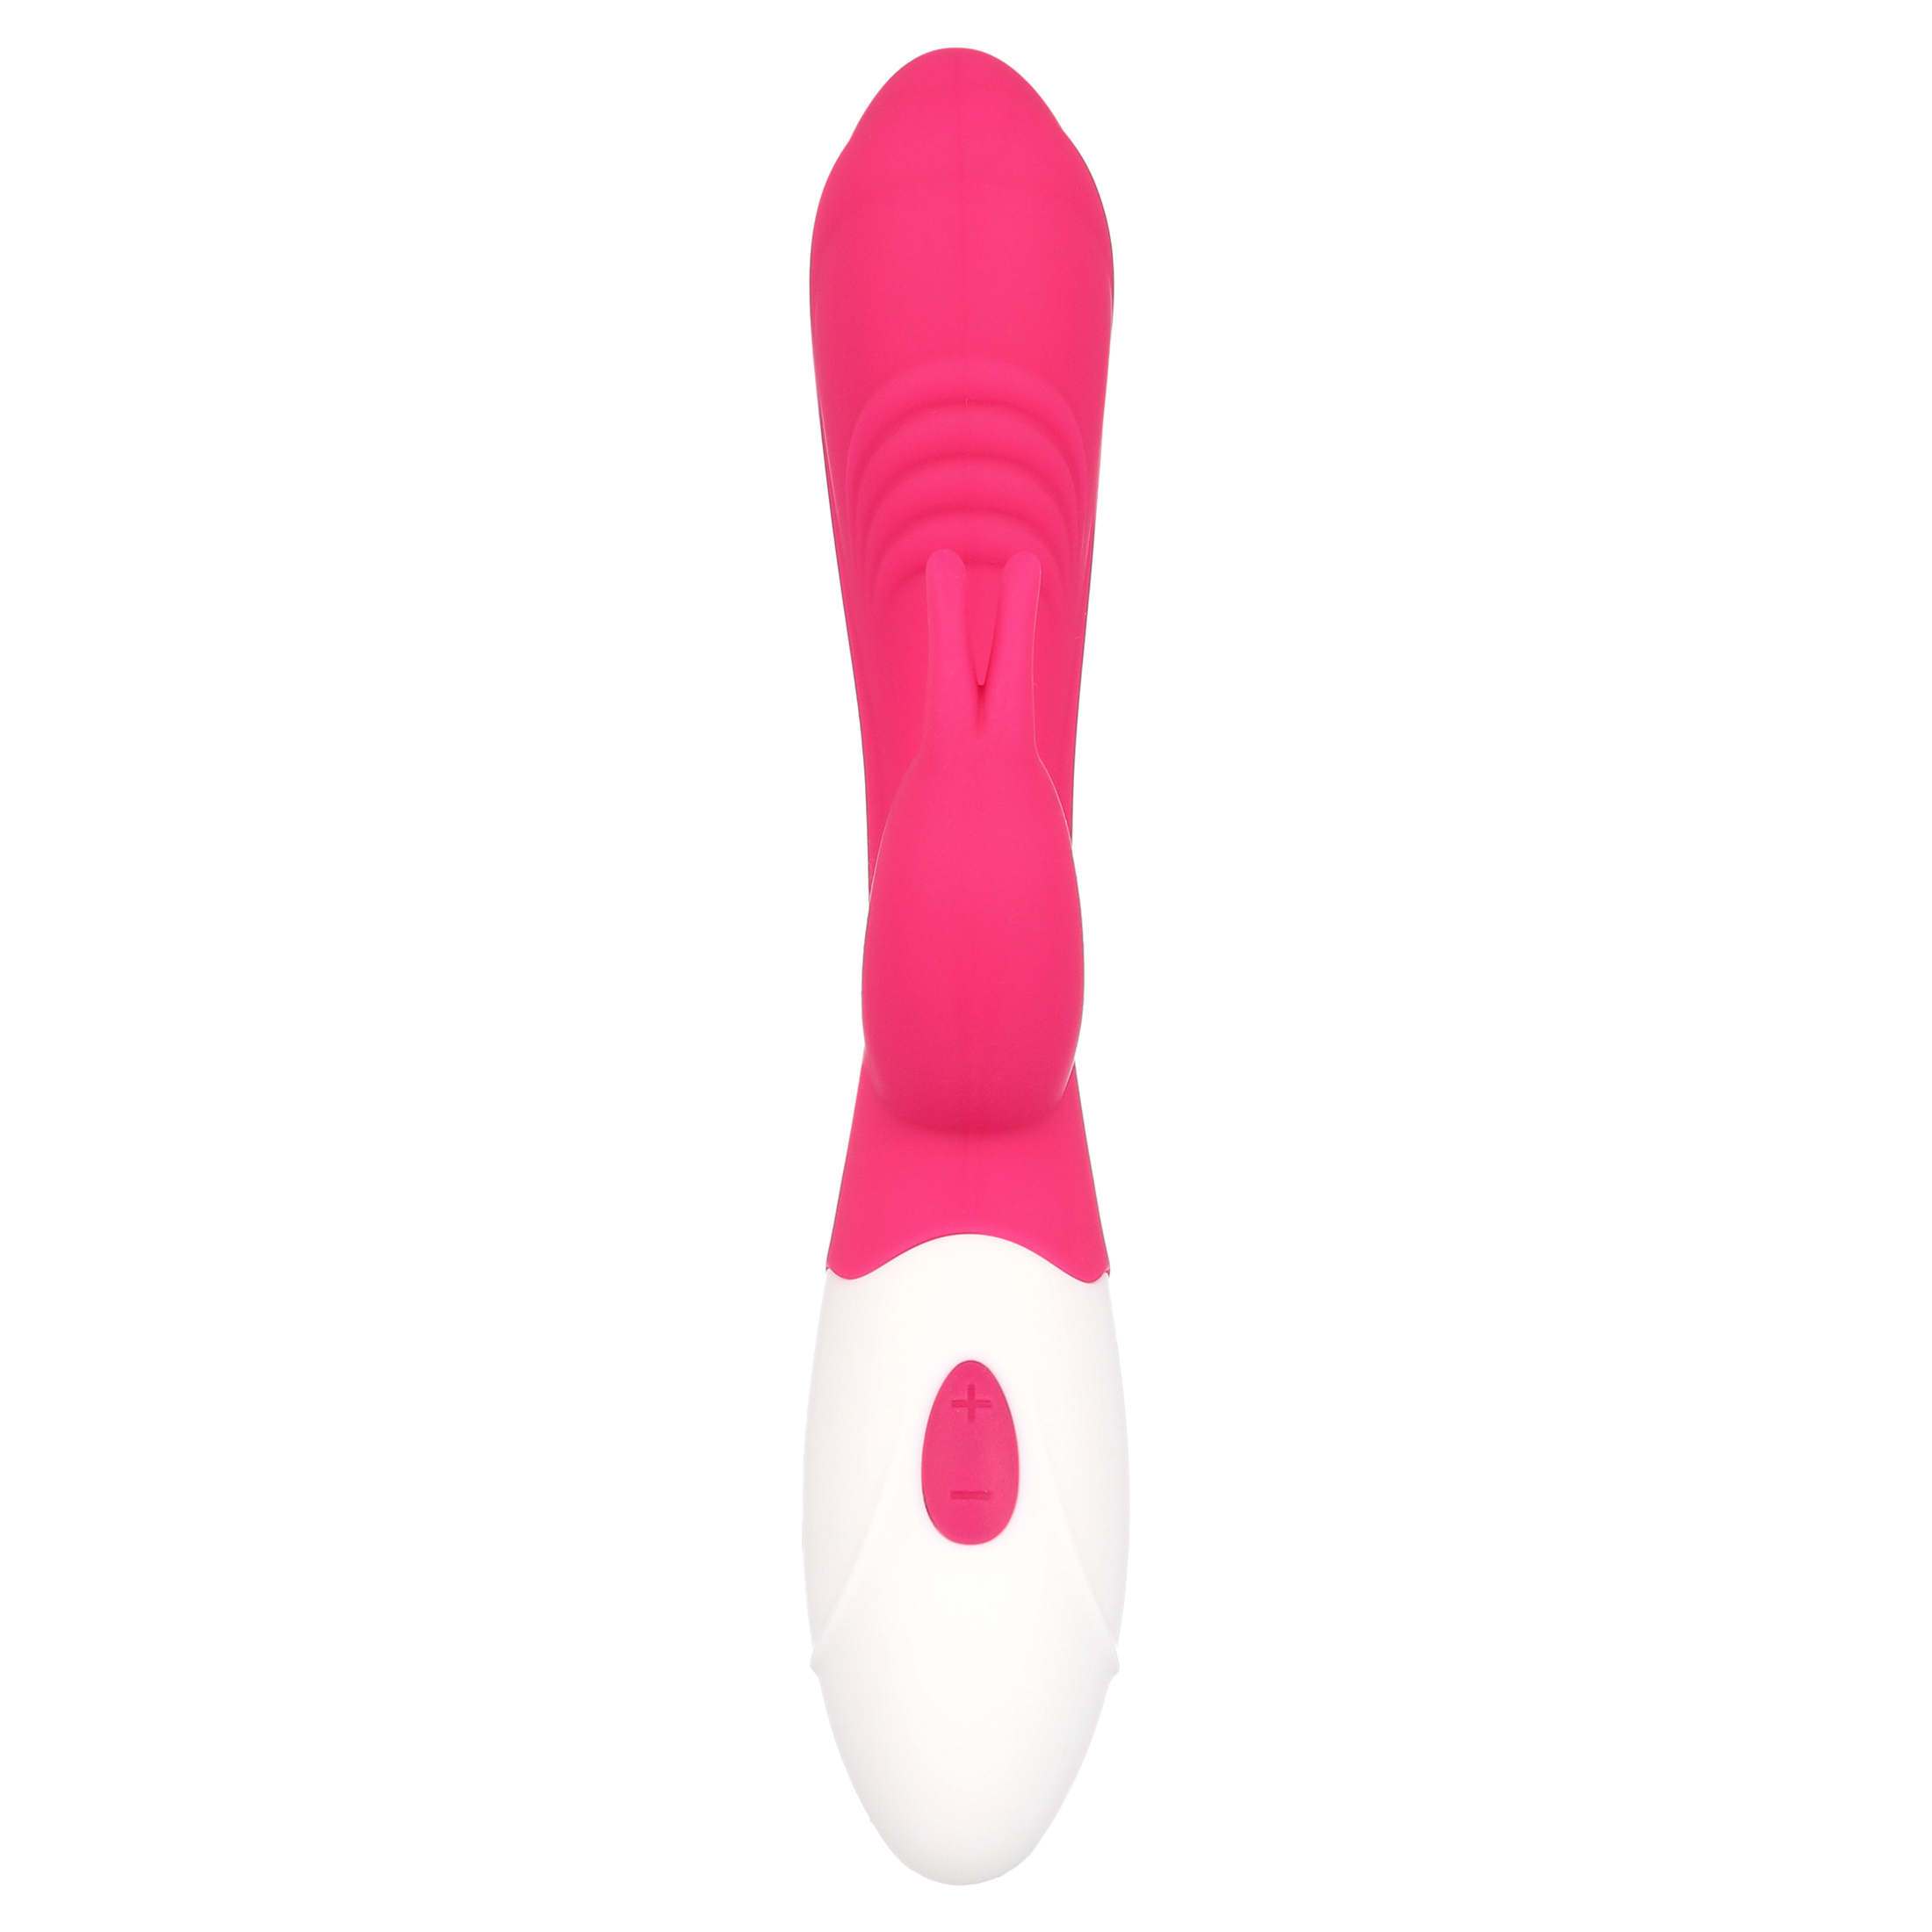 Rabbit Lily Vibrator Dual Pleasure G-Spot and Clitoral Waterproof Stimulator by Better Love - image 5 of 5